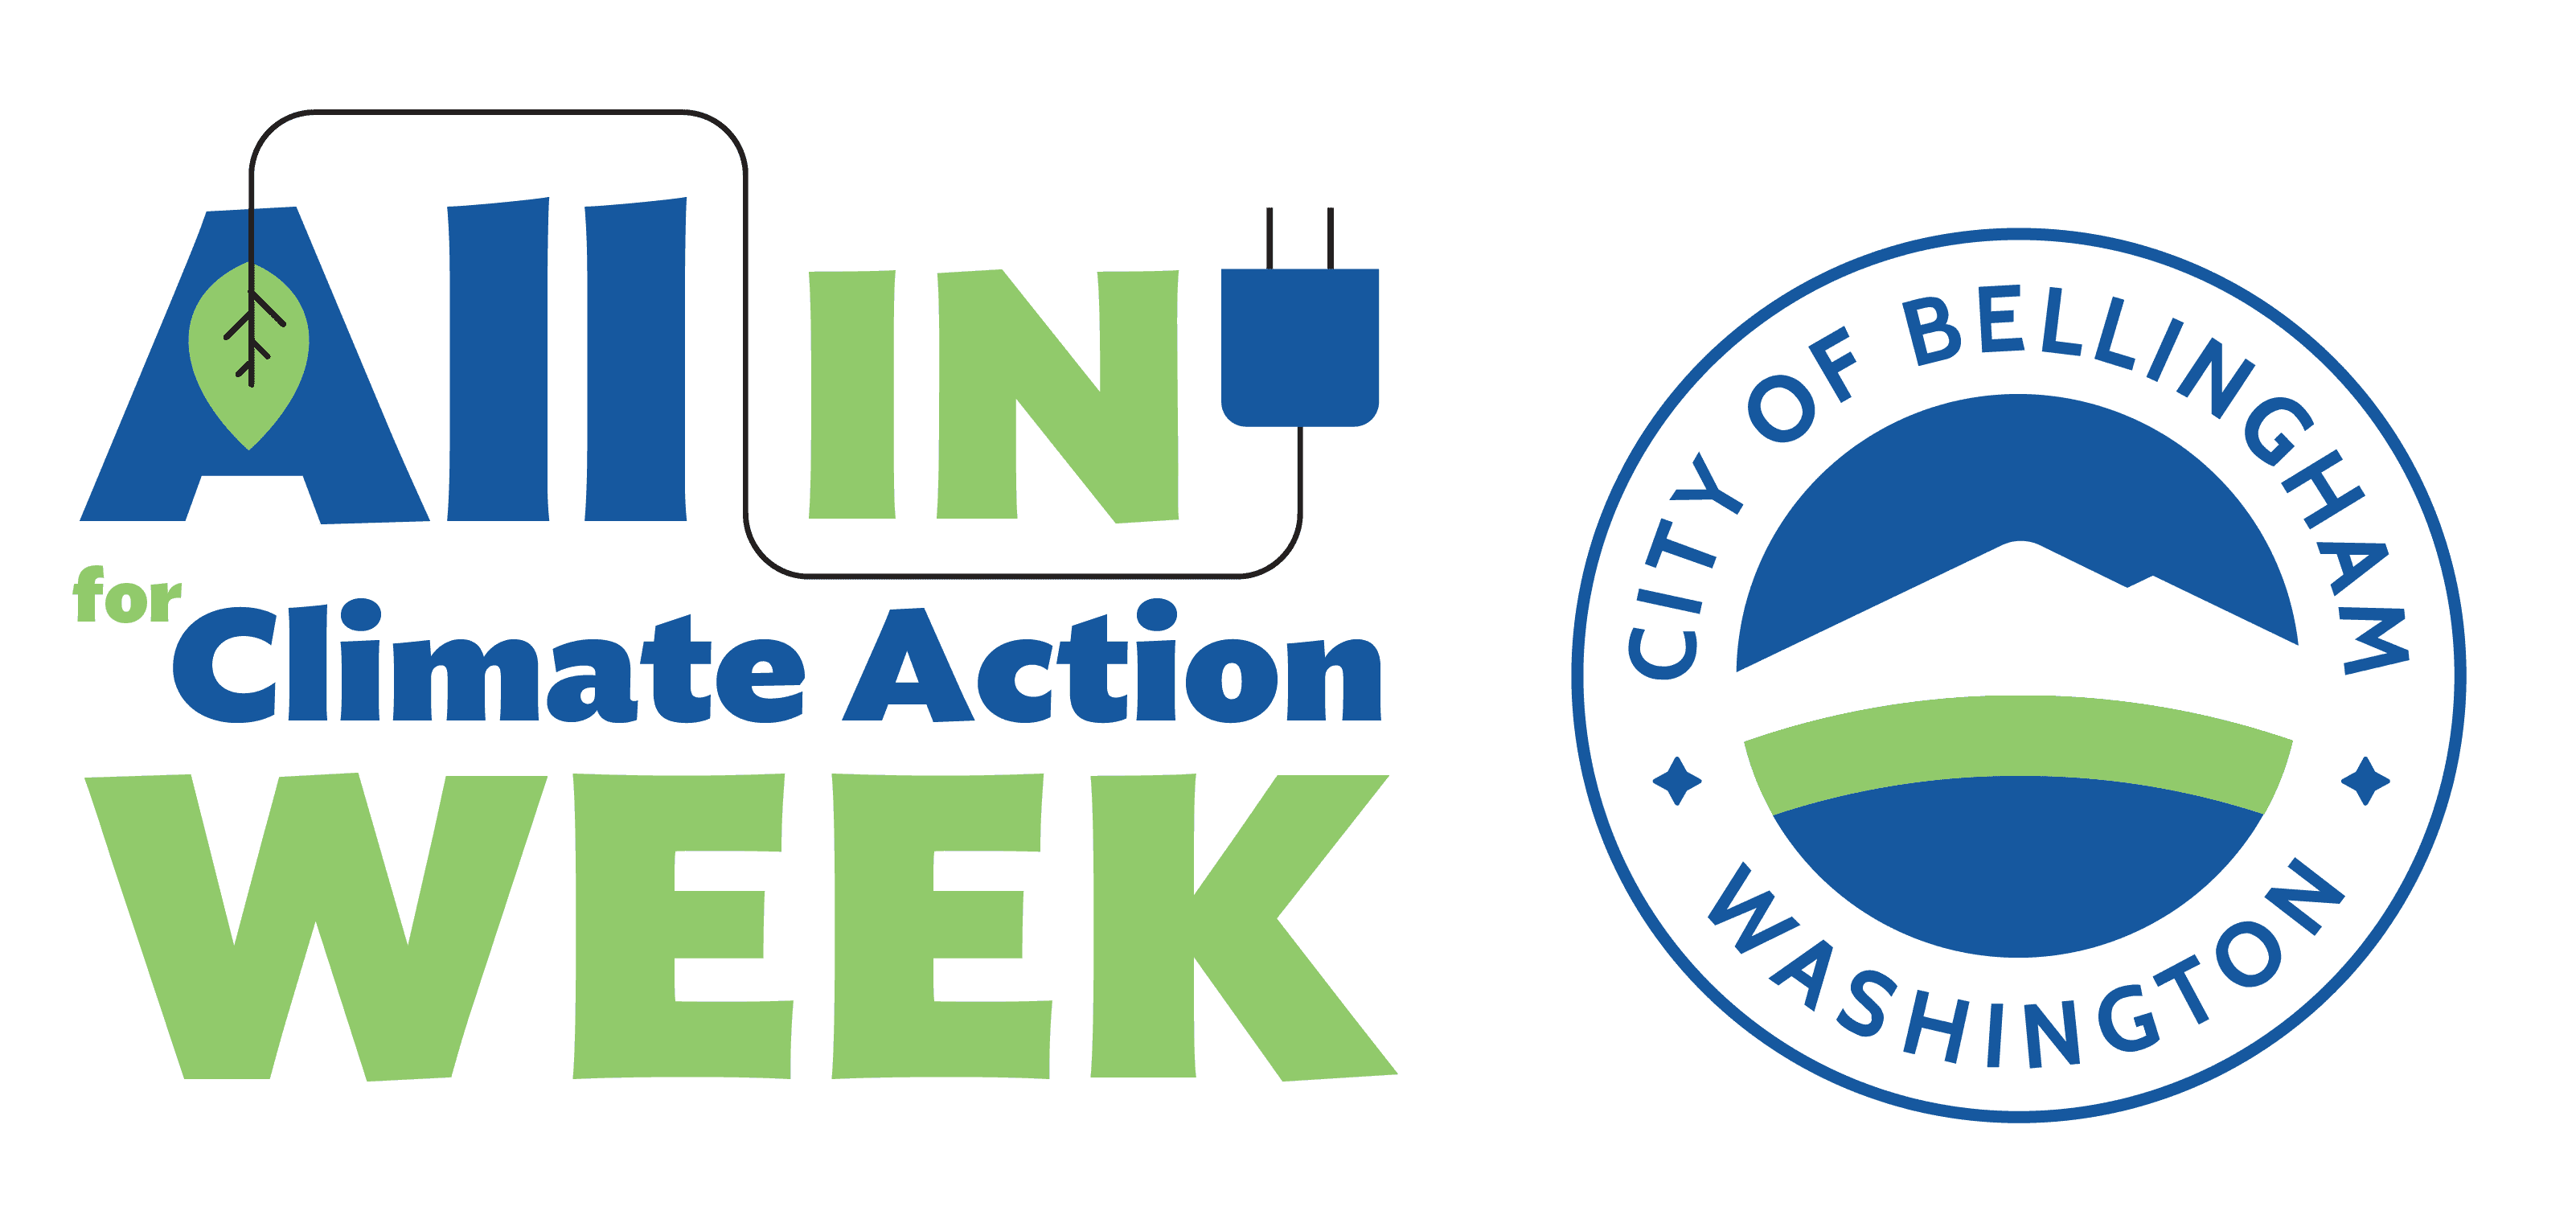 ALL IN for Climate Action Week text with City of Bellingham circular logo. 